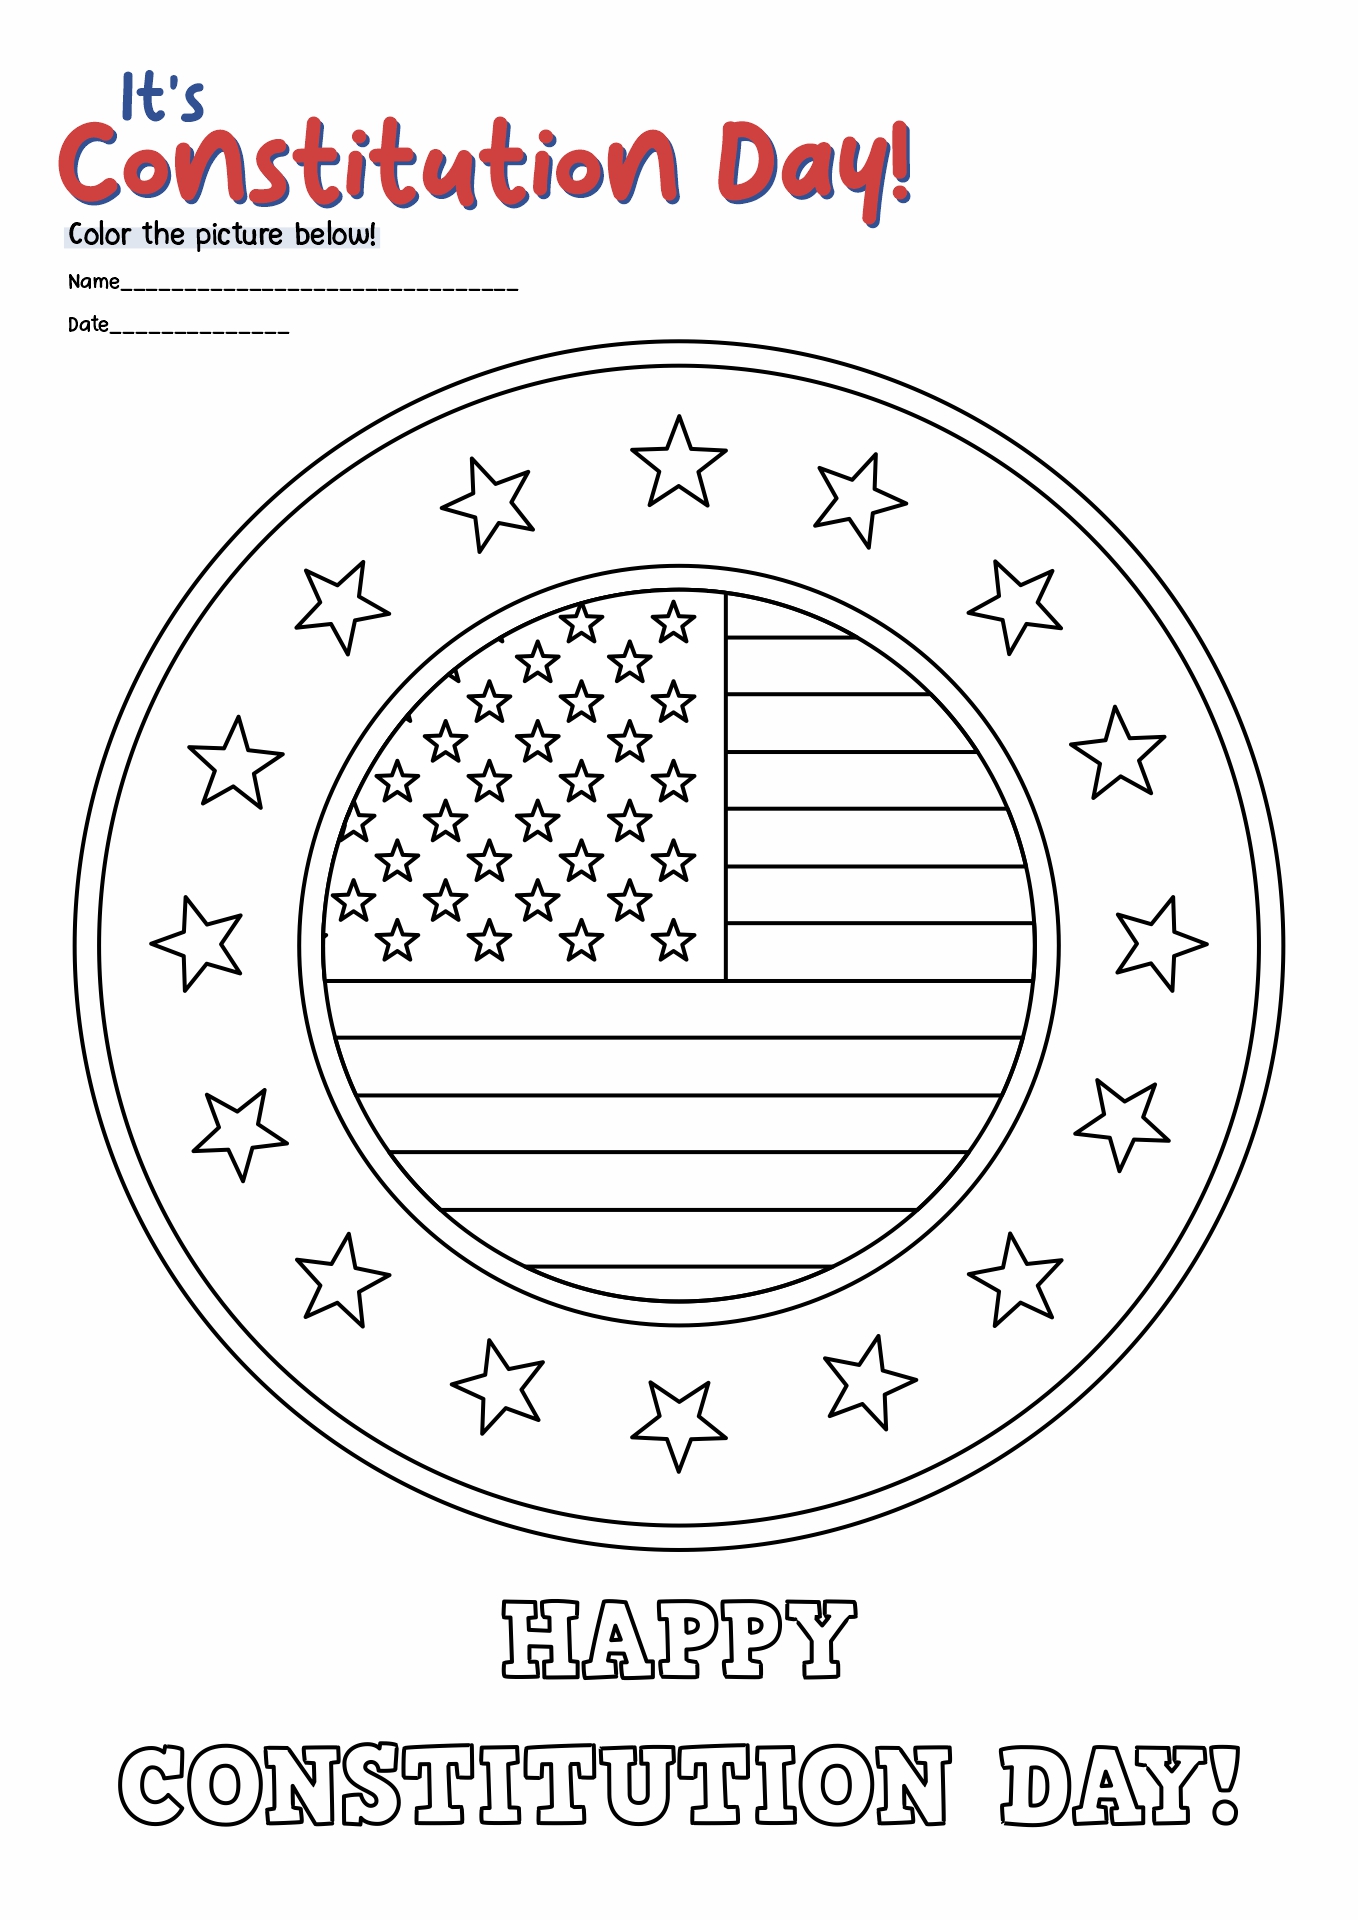 Constitution Day Coloring Pages Image